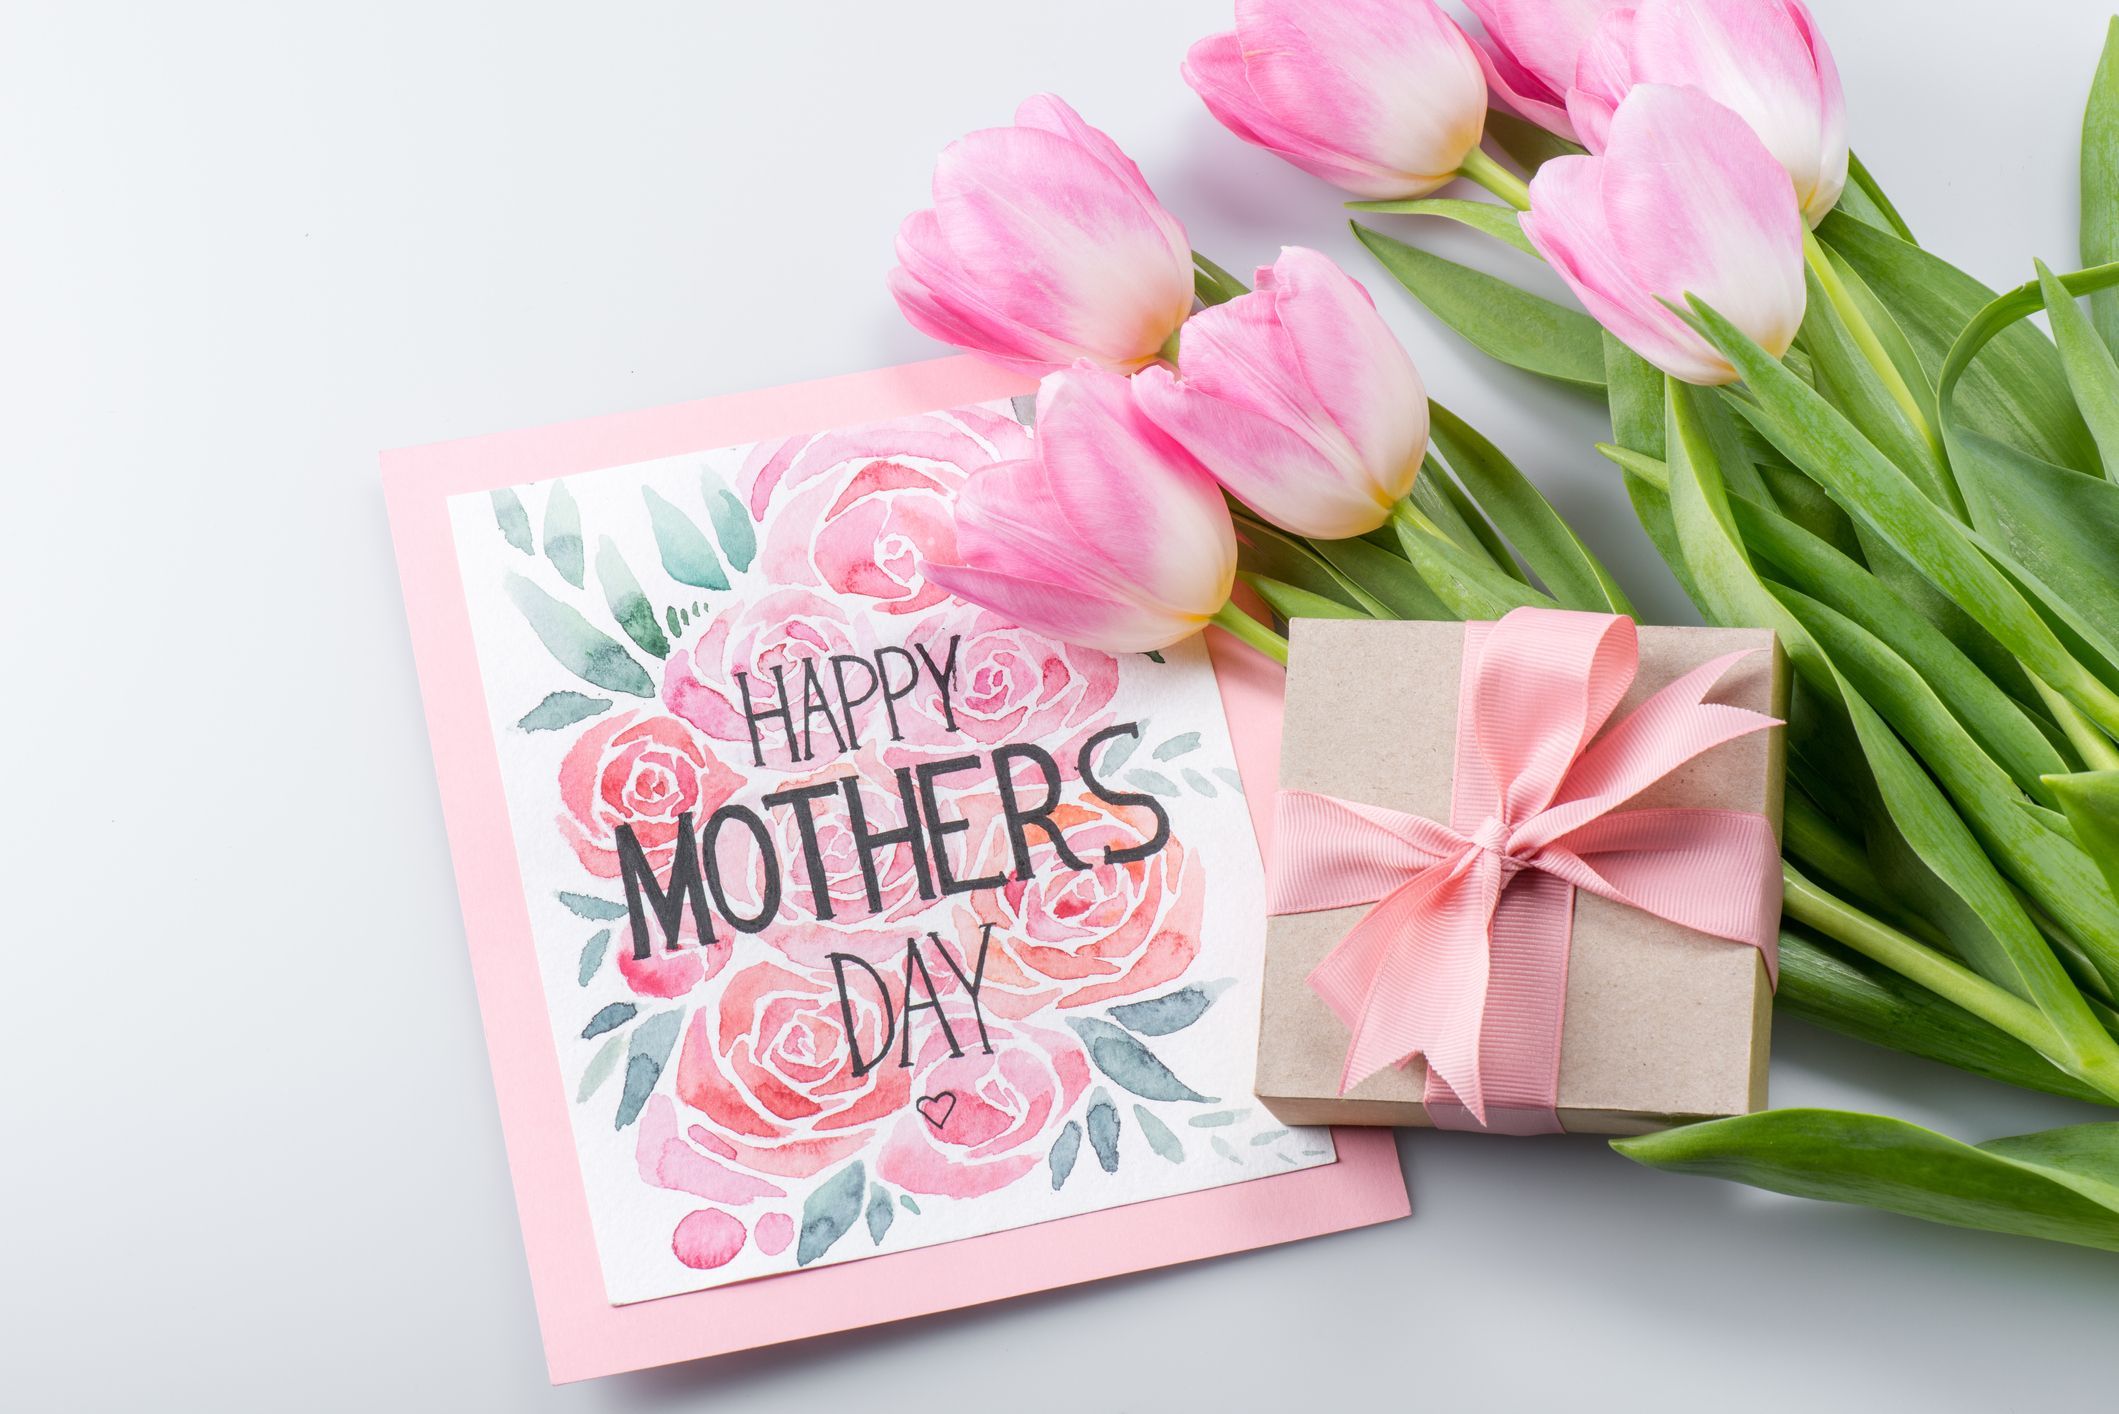 50-mother-s-day-card-messages-and-wishes-what-to-write-in-a-mother-s